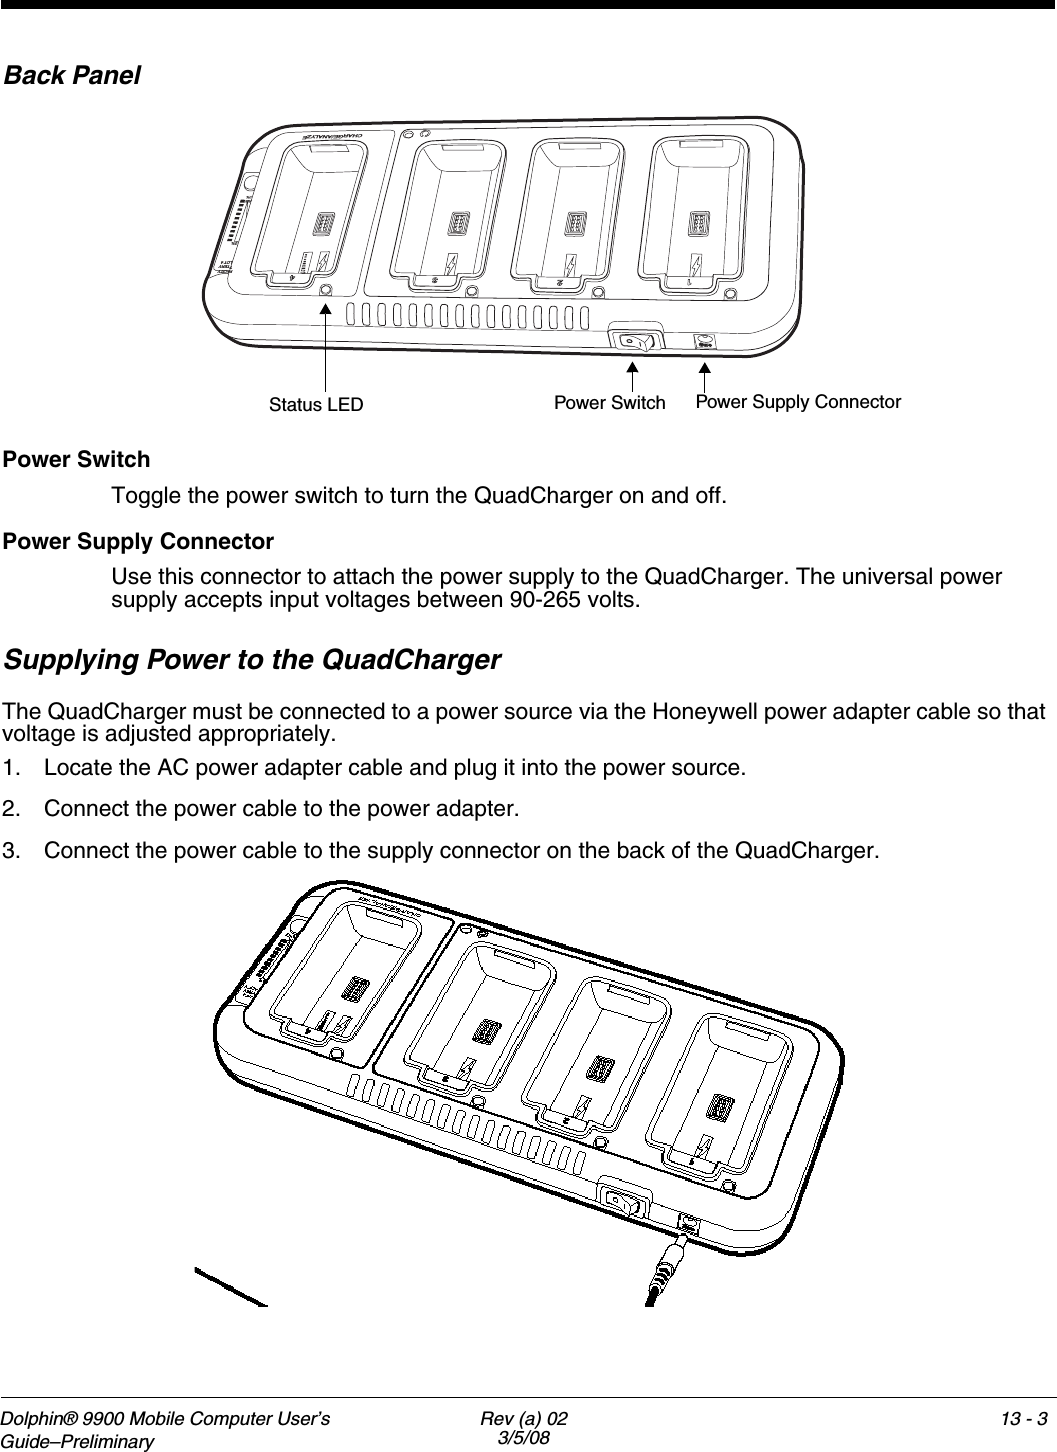 Dolphin® 9900 Mobile Computer User’s Guide–Preliminary Rev (a) 023/5/0813 - 113Dolphin QuadChargerOverviewThe Dolphin QuadCharger is a four-slot charging station that provides intelligent battery management for the Li-ion battery packs used in Dolphin terminals. Batteries charge in less than four hours. The fourth slot features a battery analyzer that completely resets a battery, then displays its remaining capacity.CompatibilityThe QuadCharger is compatible with the Li-ion batteries that power the Dolphin terminals.Charging ProcessEach charging slot works independently of the other three. As battery packs charge, the charging circuitry follows the two-step charging process (CC-CV) that is recommended for Li-Ion batteries. The process monitors changes in temperature, current, and voltage and resets the battery pack.CapacityThe Dolphin QuadCharger holds four Li-ion batteries.Use only Dolphin 9900 peripherals, power cables, and power adapters. Use of peripherals, cables, or power adapters not sold/manufactured by Hand Held Products will void the warranty and may damage the terminal.Use only the Li-ion battery packs provided by Hand Held Products. Use of any battery not sold/manufactured by Hand Held Products may damage the terminal and/or the battery, may pose a personal hazard to the user, and will void the warranty. !!